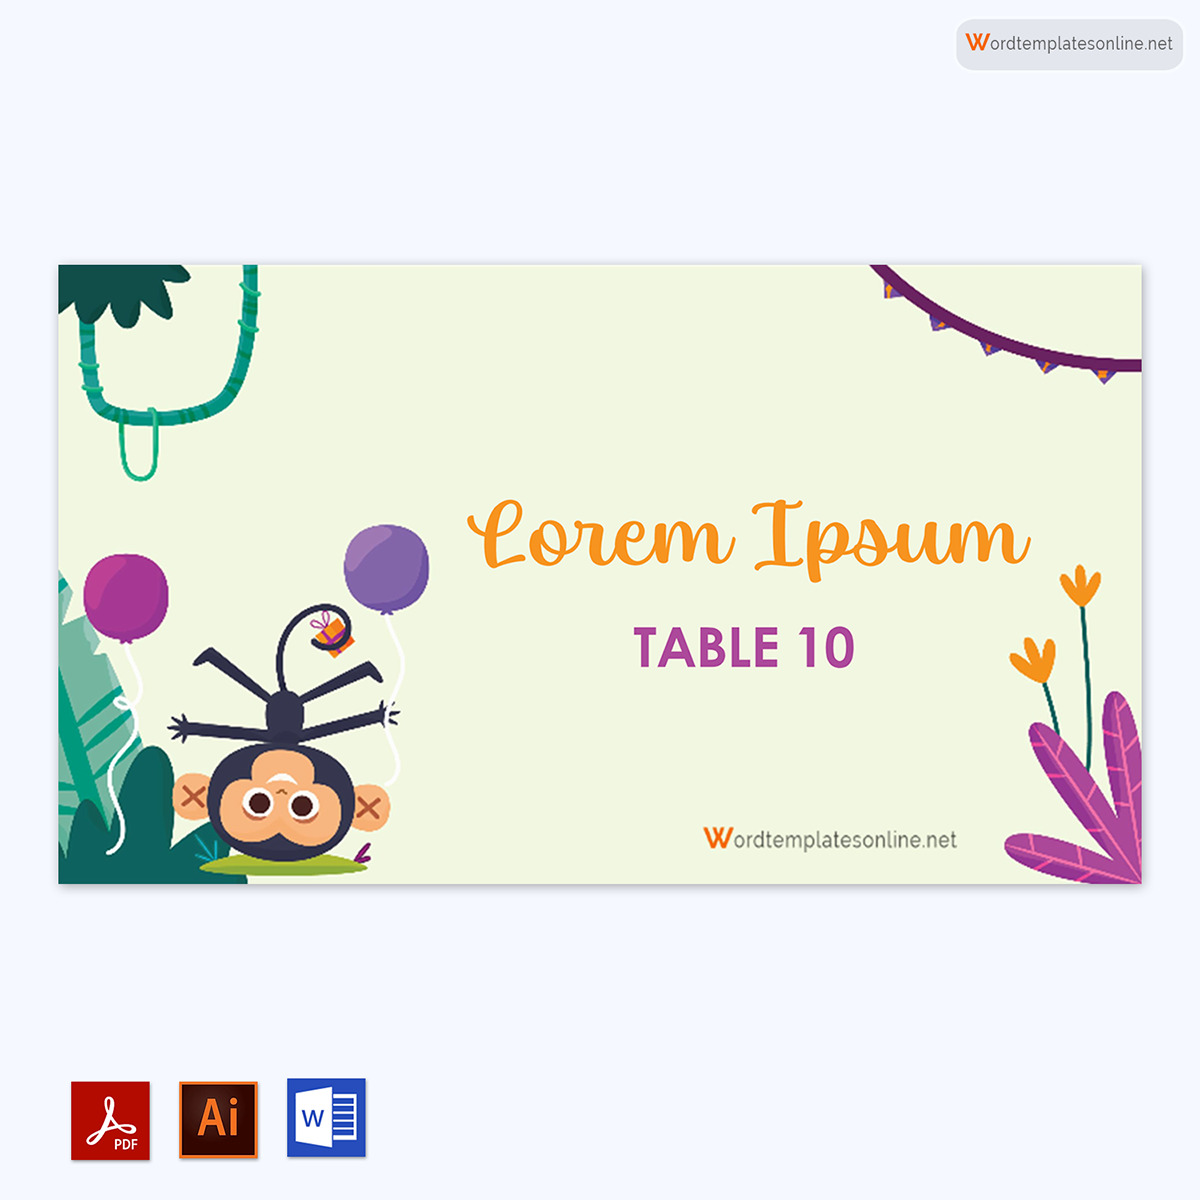 Free Place Card Template - Downloadable Word Document